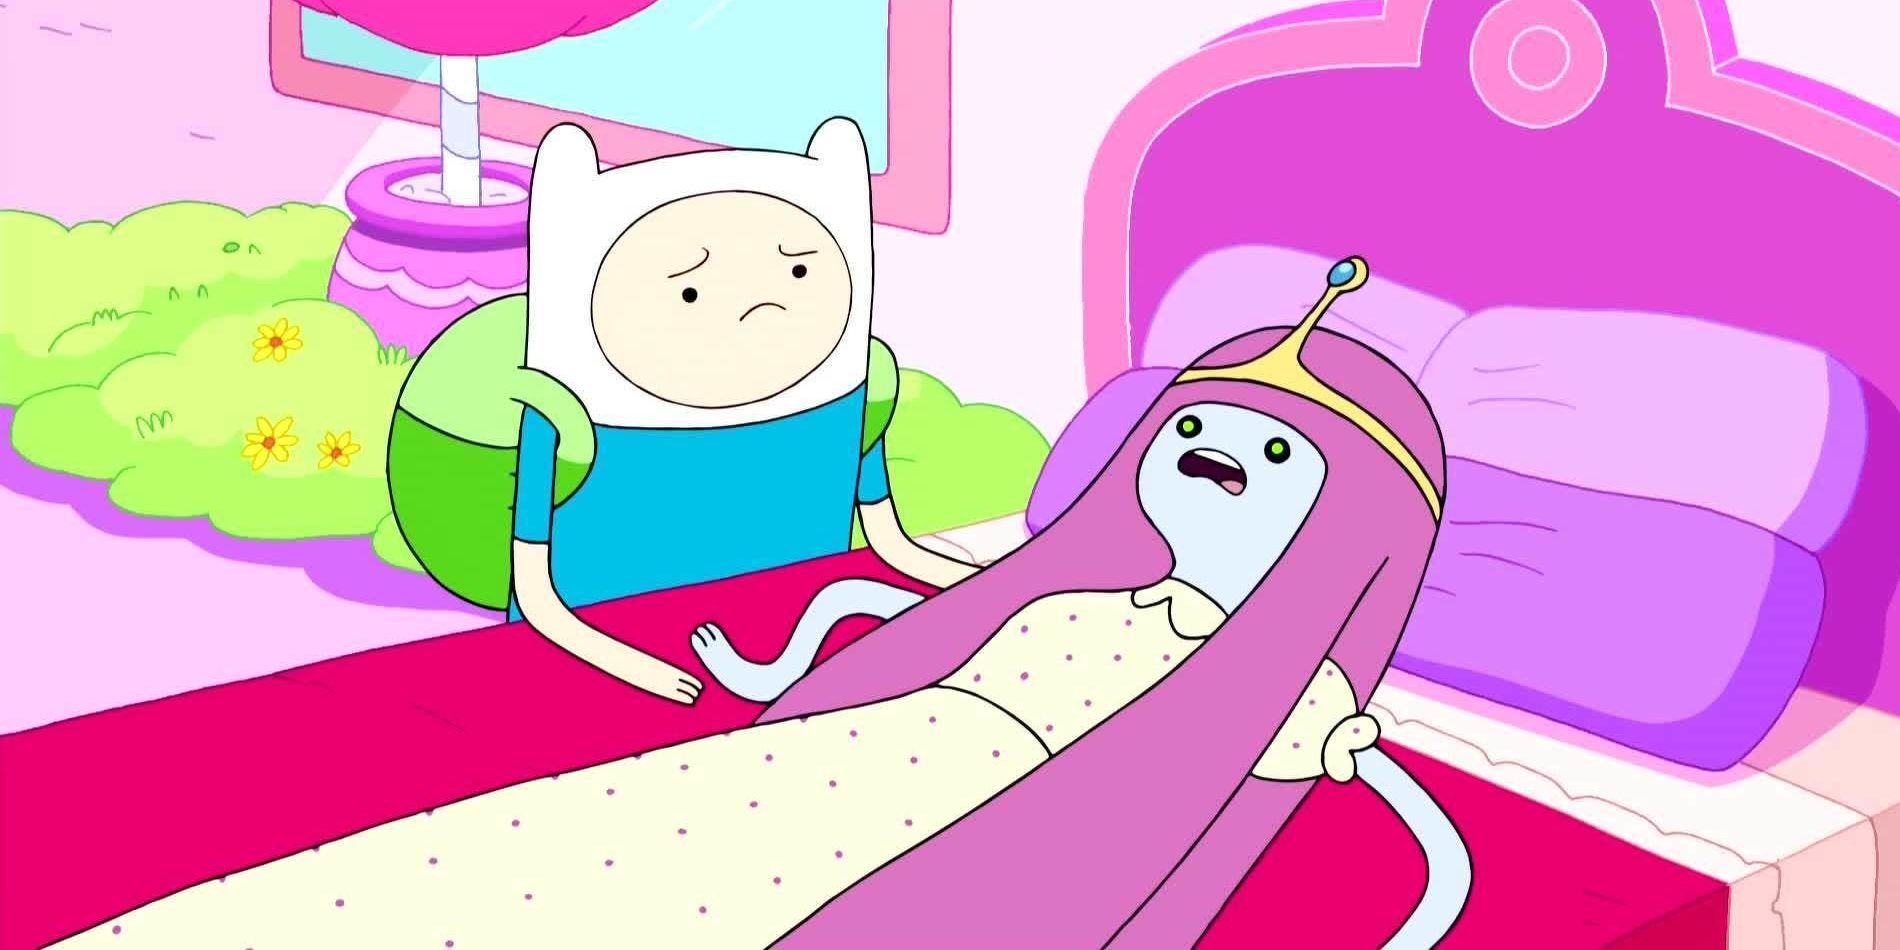 Adventure Time The Best Episode From Each Season Ranked By IMDb Score